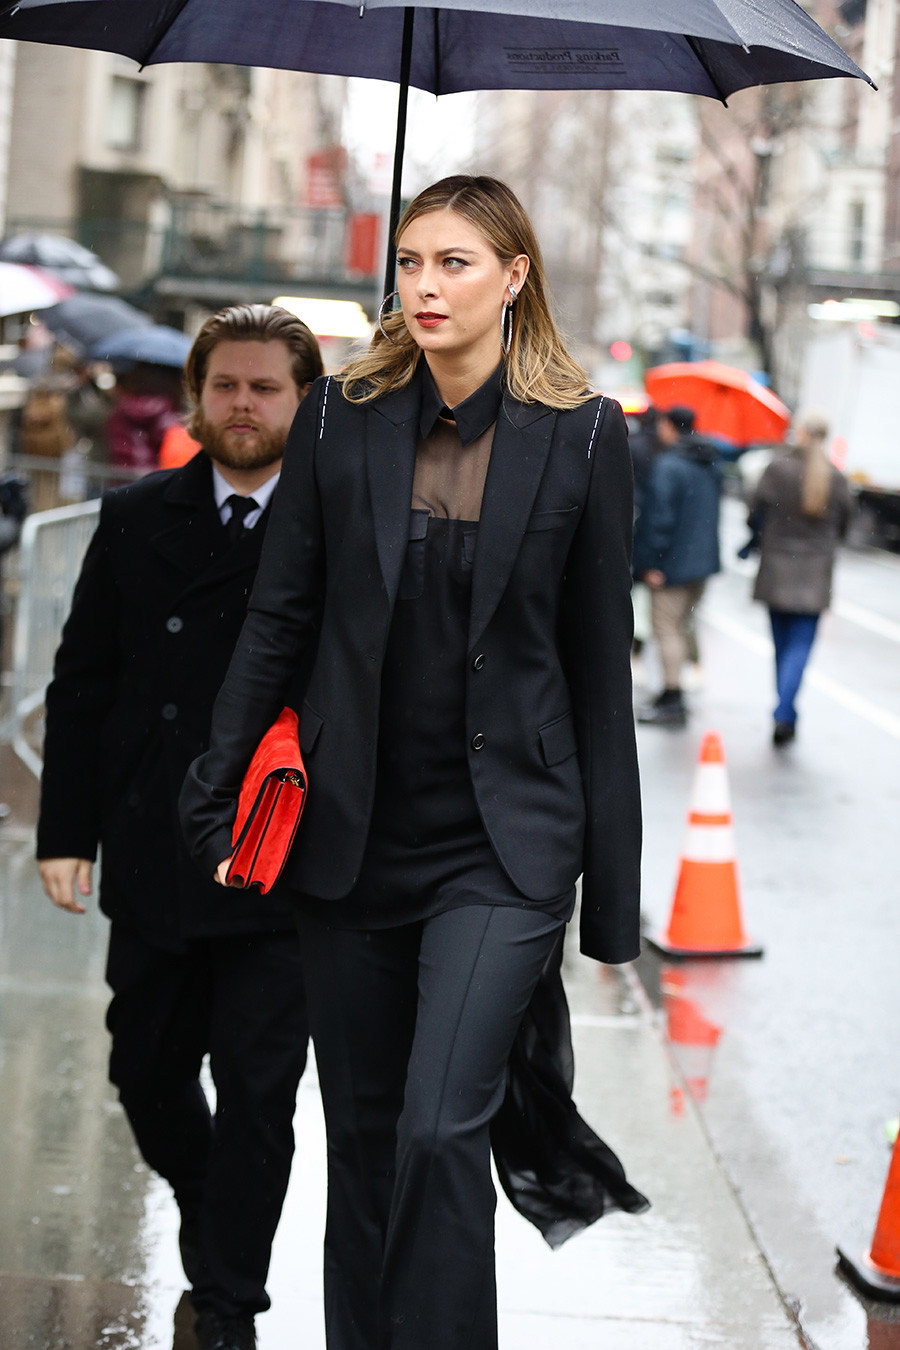 Maria Sharapova is seen outside of the Vera Wang show during New York Fashion Week on February 11, 2020 in New York City